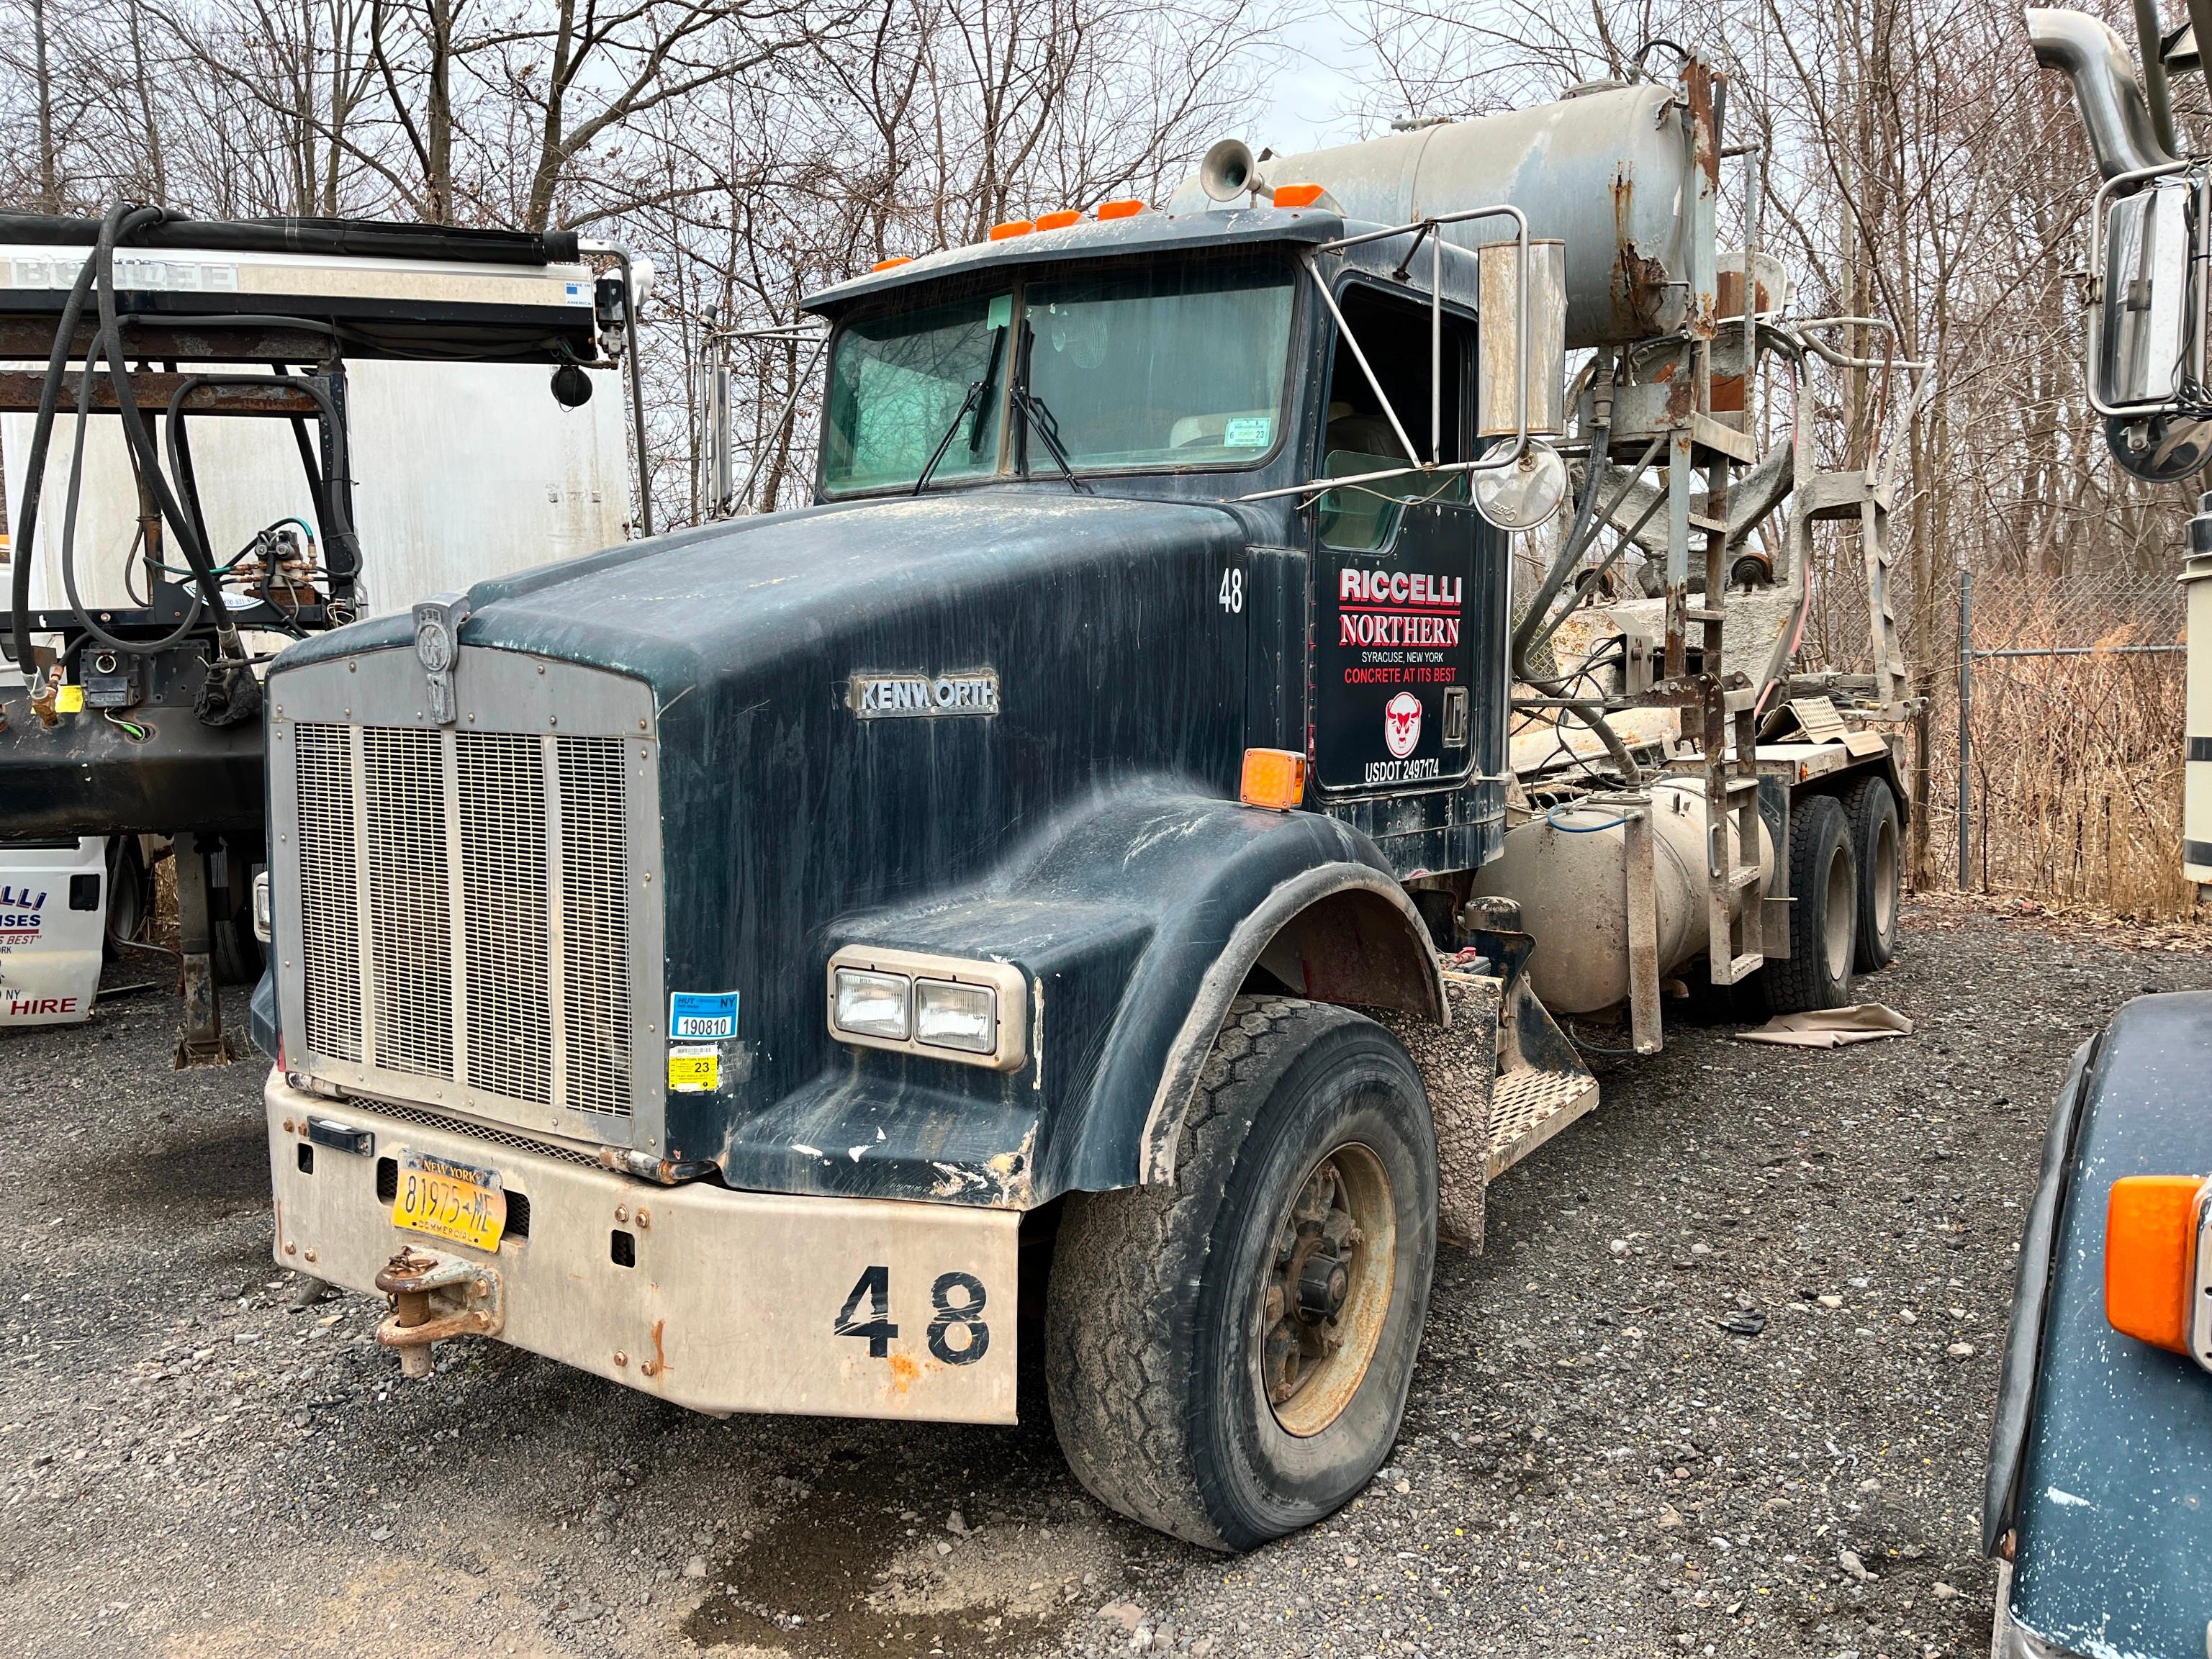 2000 KENWORTH CONCRETE MIXER TRUCK VN:N/A Powered By